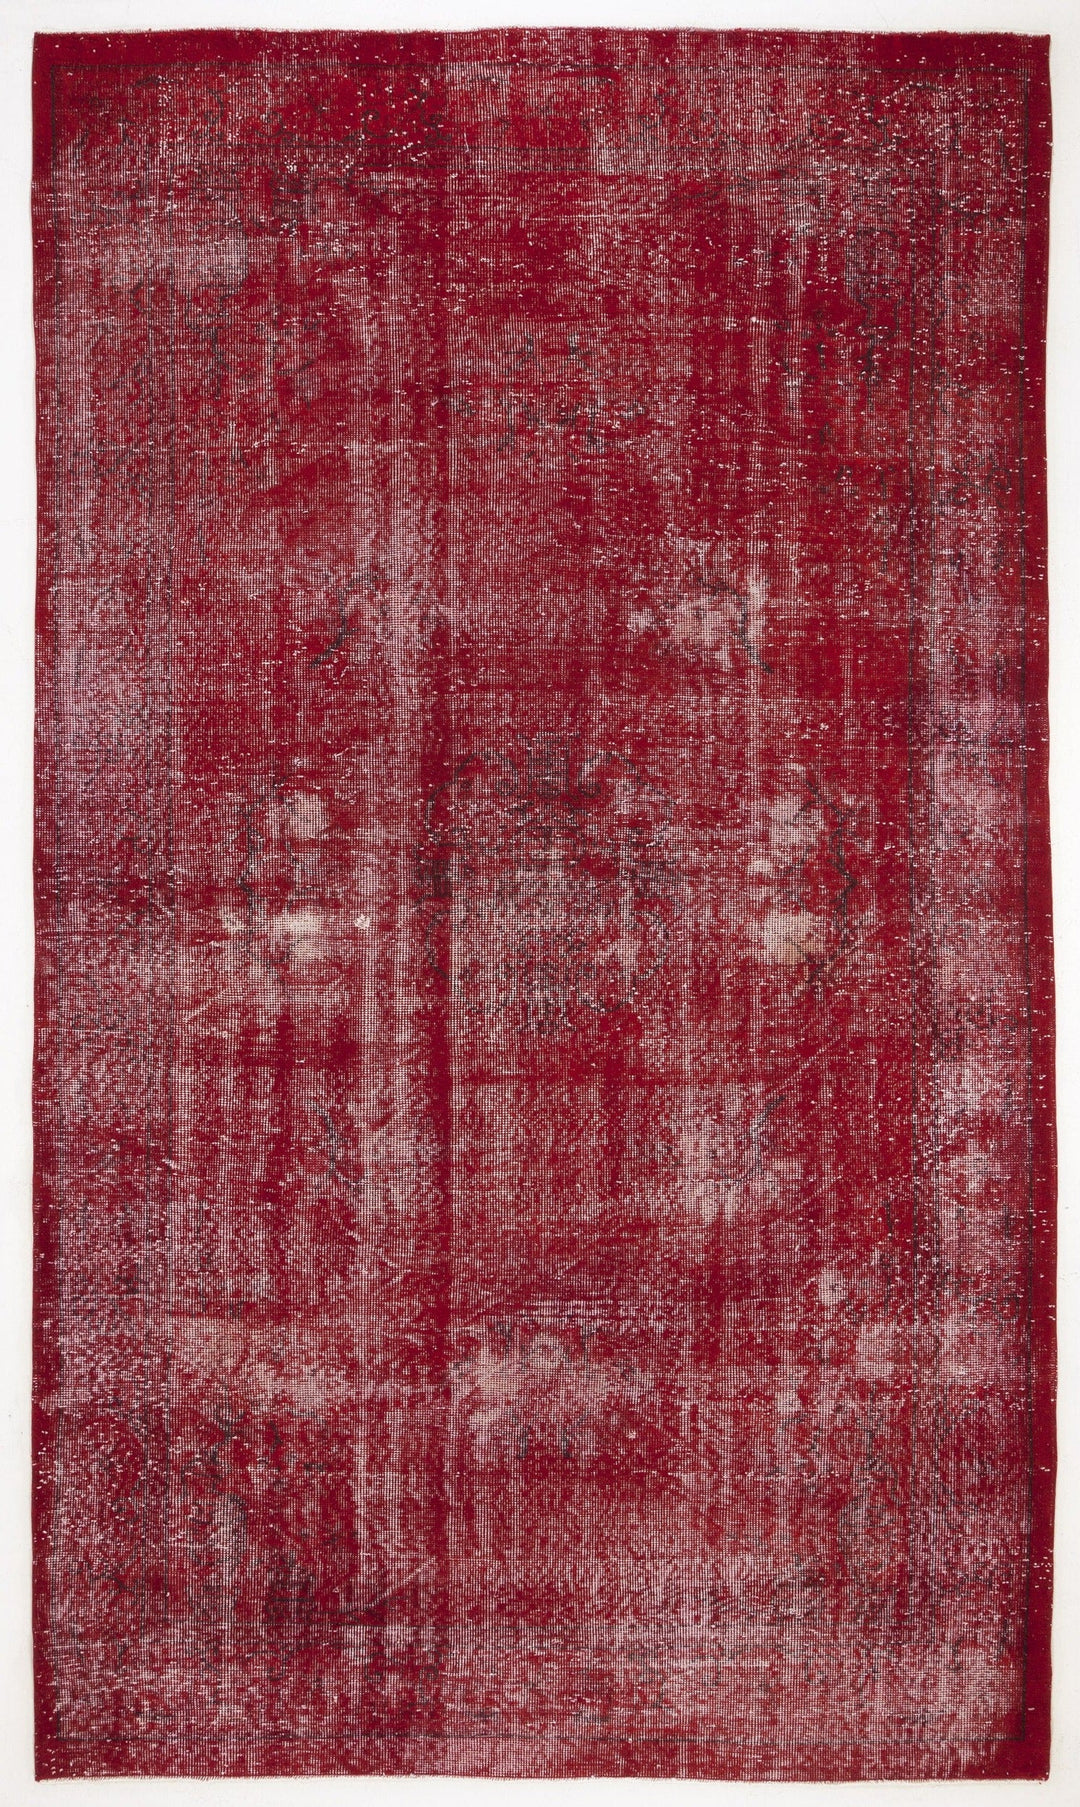 Athens Red Tumbled Wool Hand Woven Carpet 183 x 319